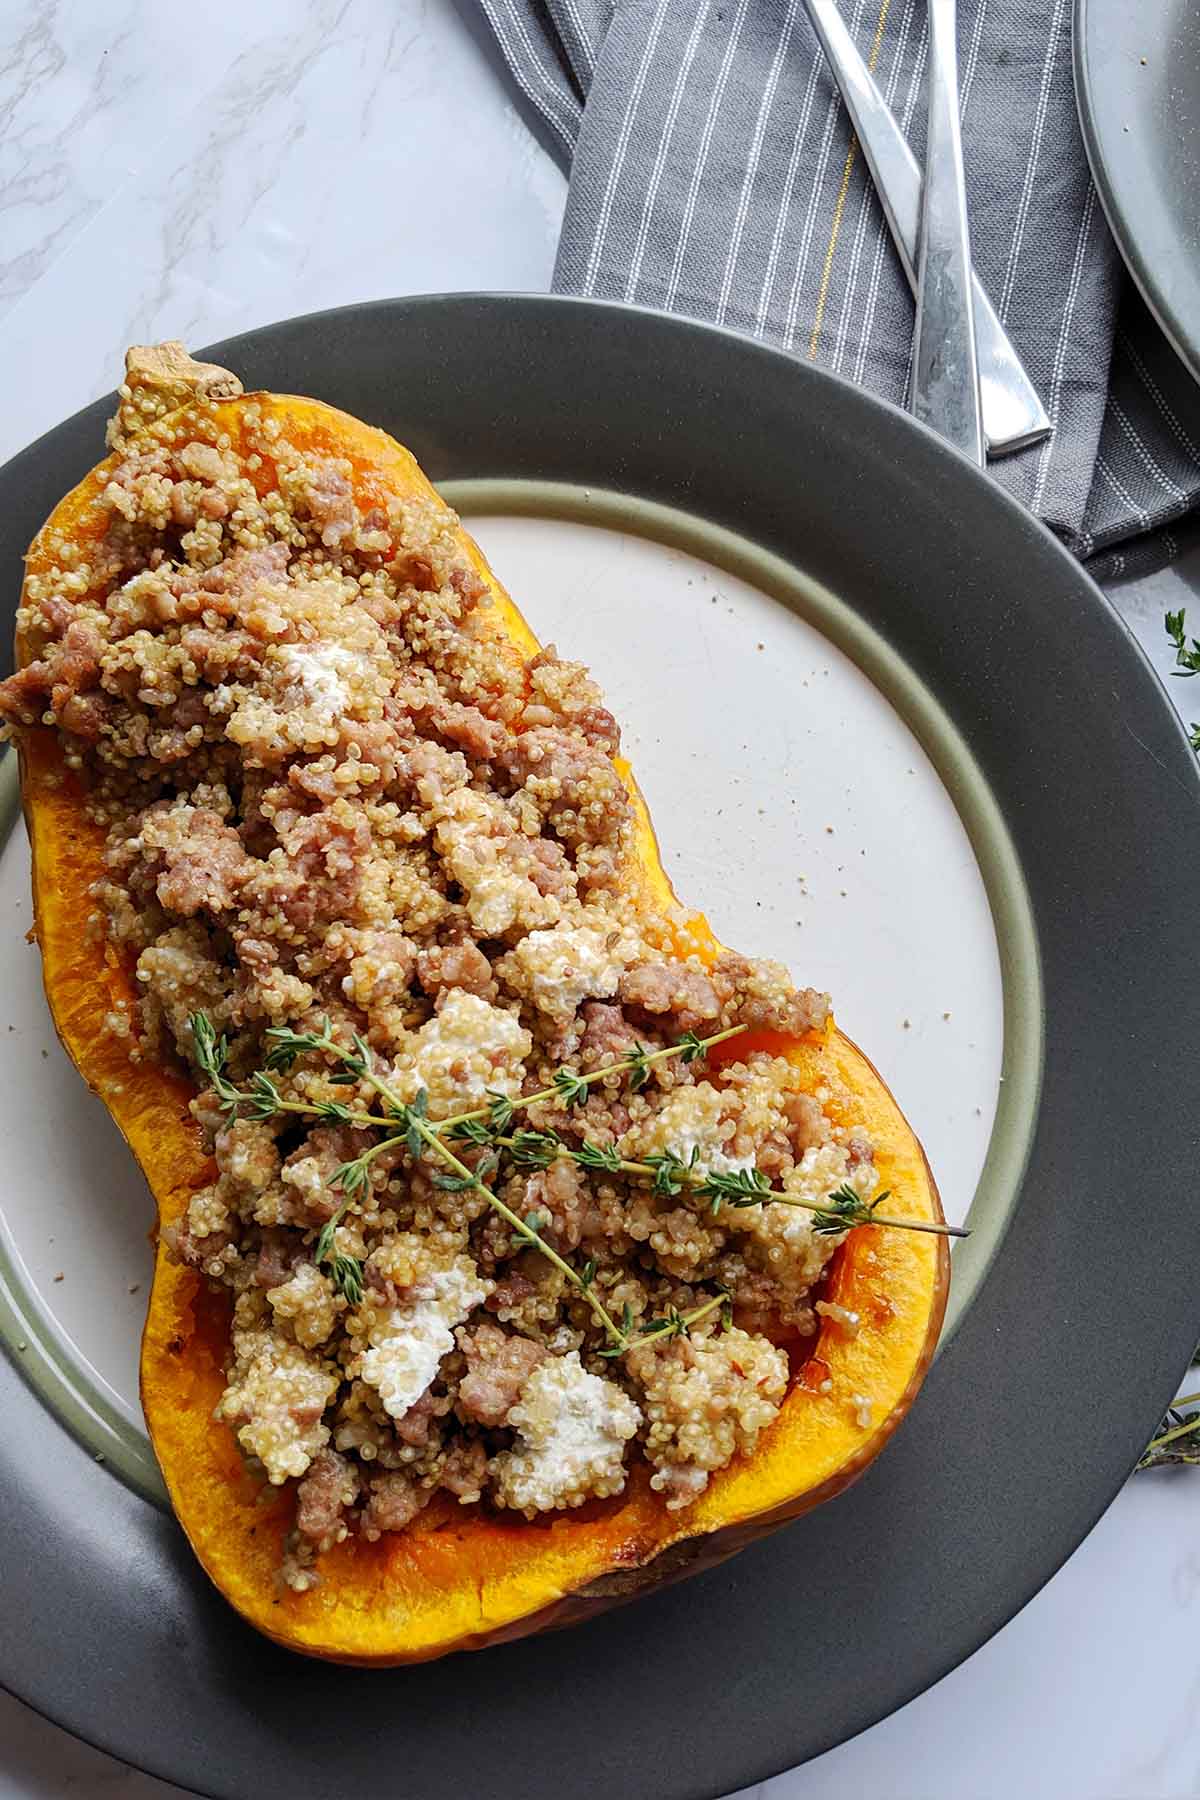 half of a butternut squash stuffed with cooked sausage, goat cheese, and quinoa.